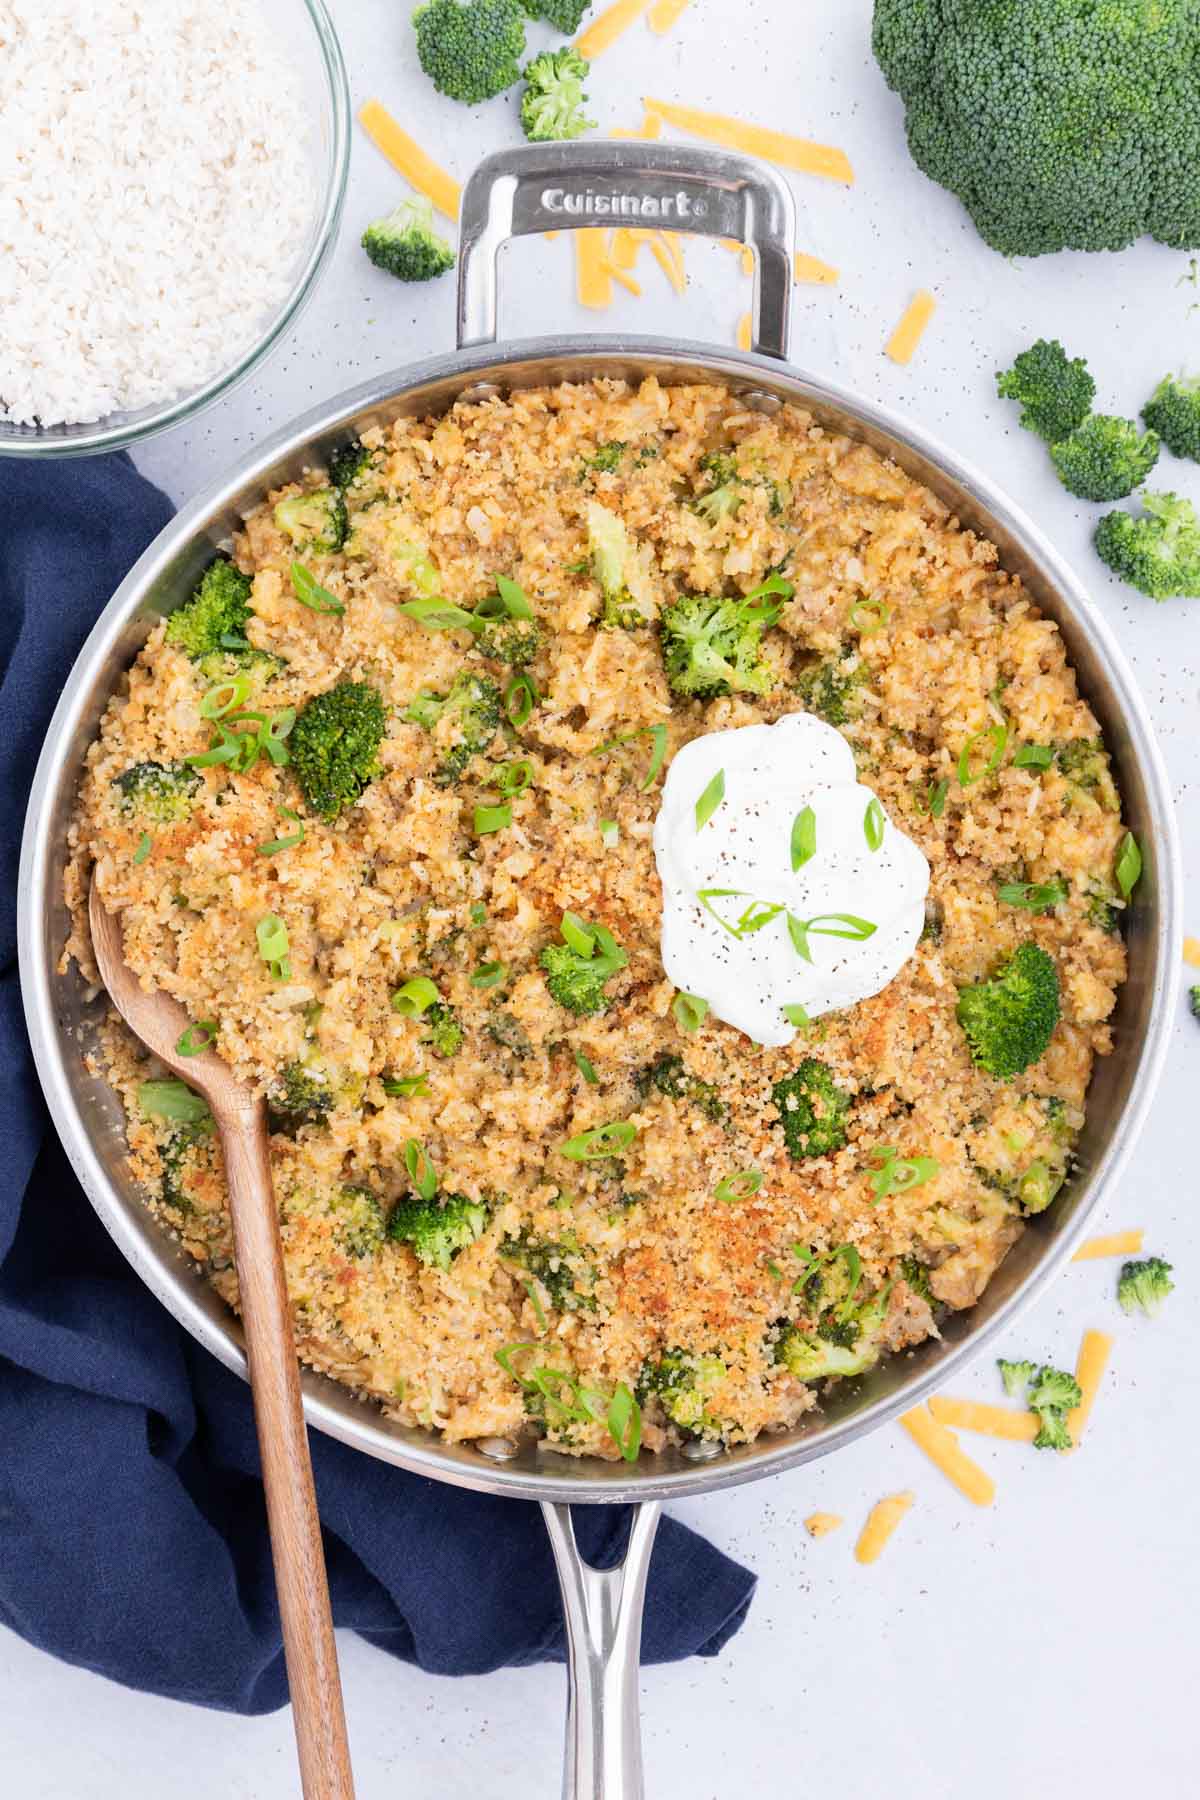 The cheesy broccoli, rice, and turkey skillet is served with a dollop of sour cream.